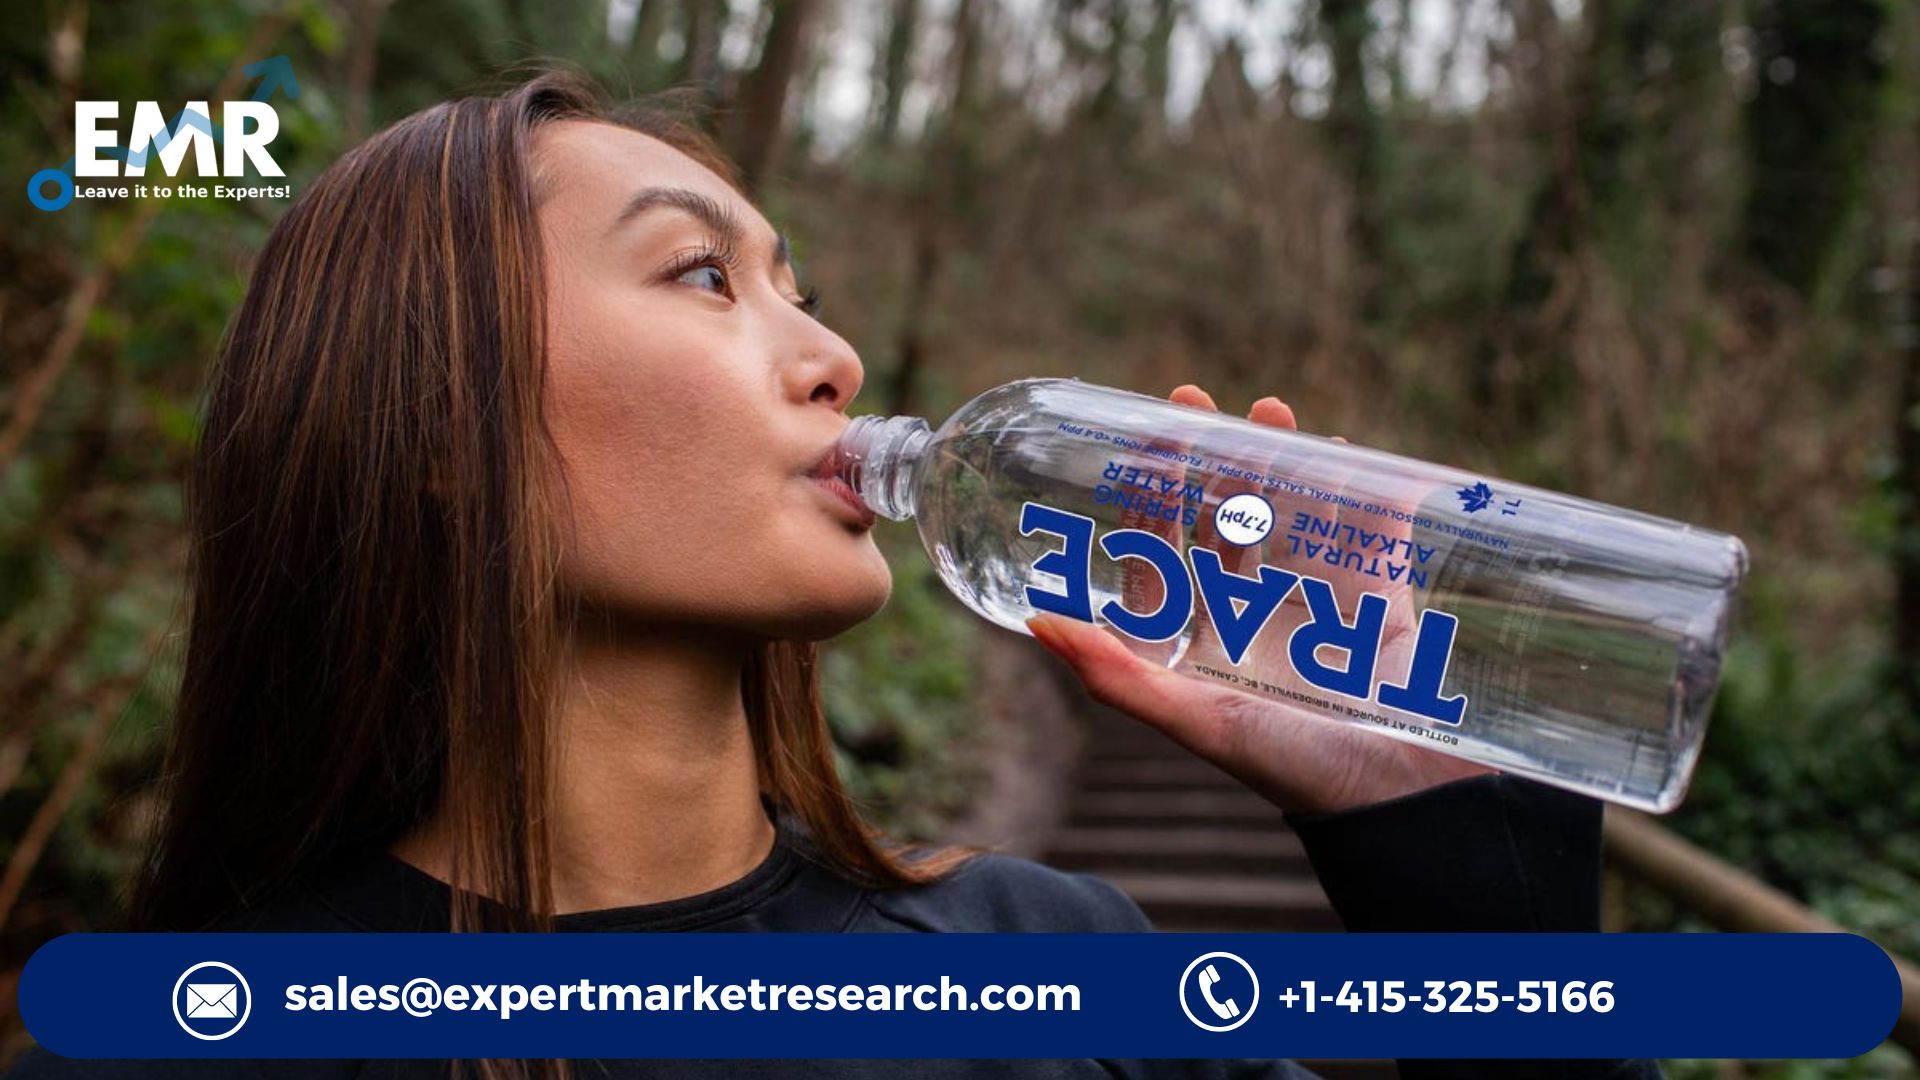 Global Functional Water Market Size, Share, Outlook, Revenue Estimates, Analysis, Key Players, Forecast 2023-2028